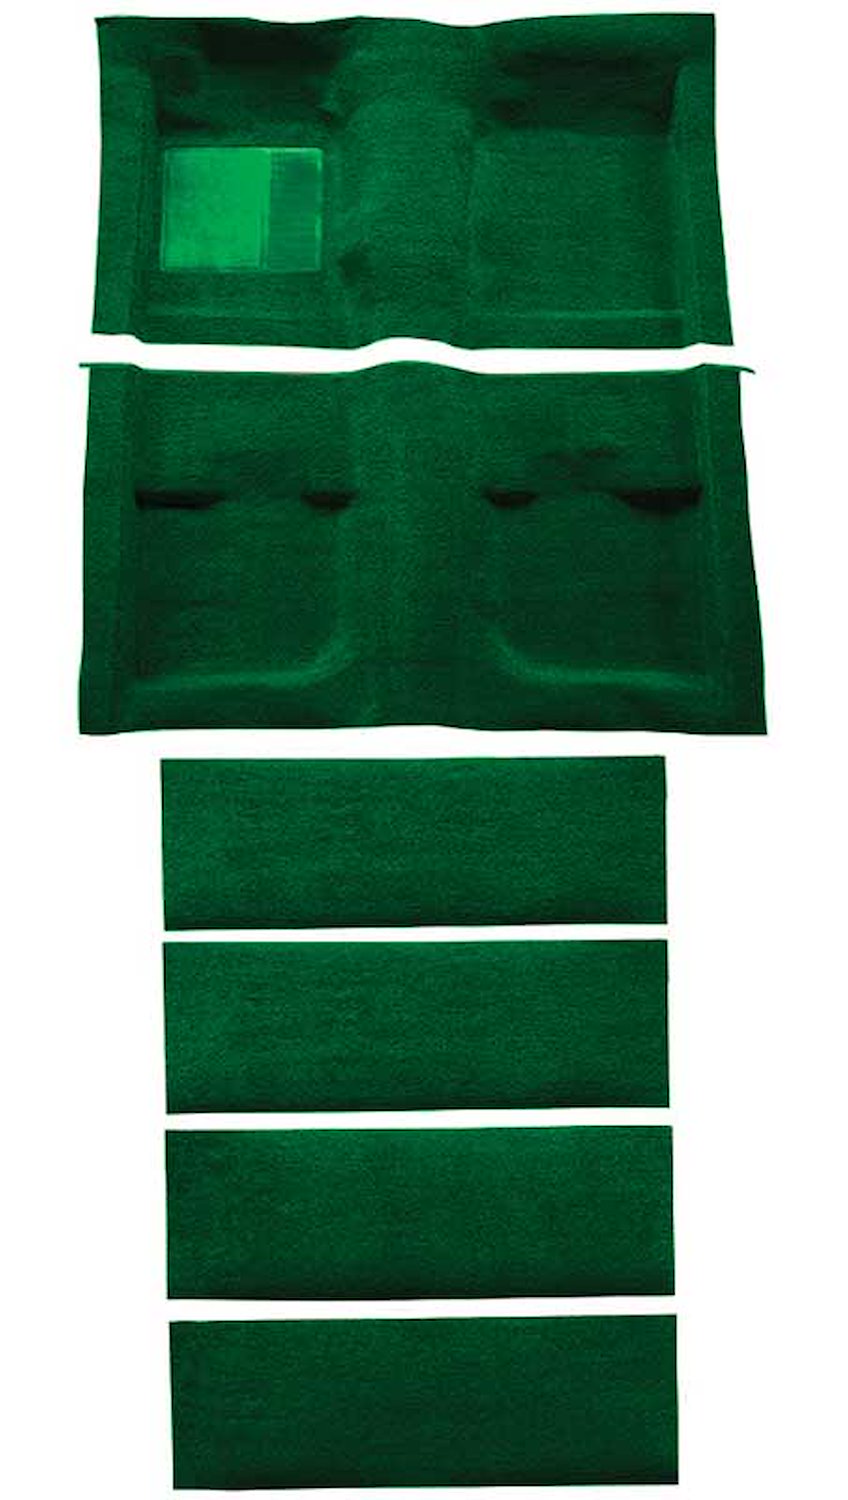 A4061A39 Nylon Loop Floor and Fold Down Seat Carpet Set 1971-73 Mustang Fastback; Green